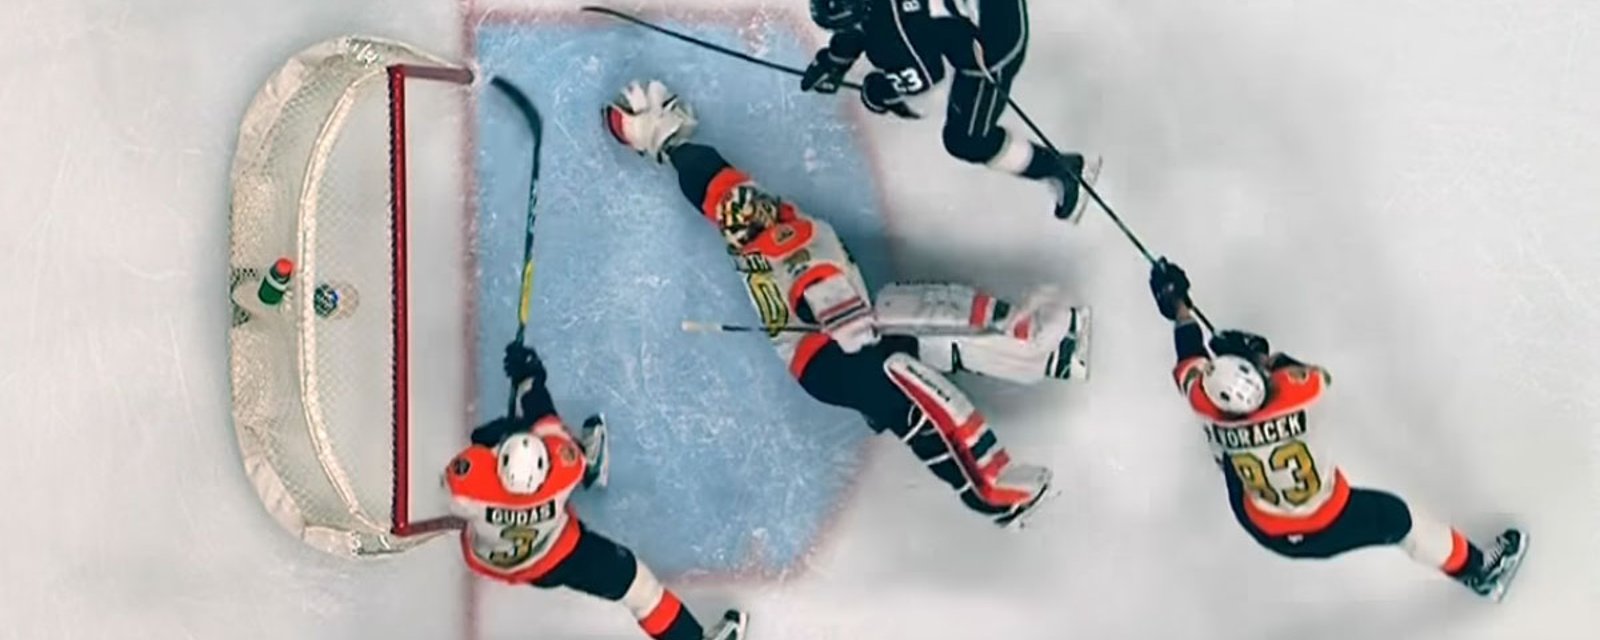 Must See: Neuvirth absolutely robs Dustin Brown!